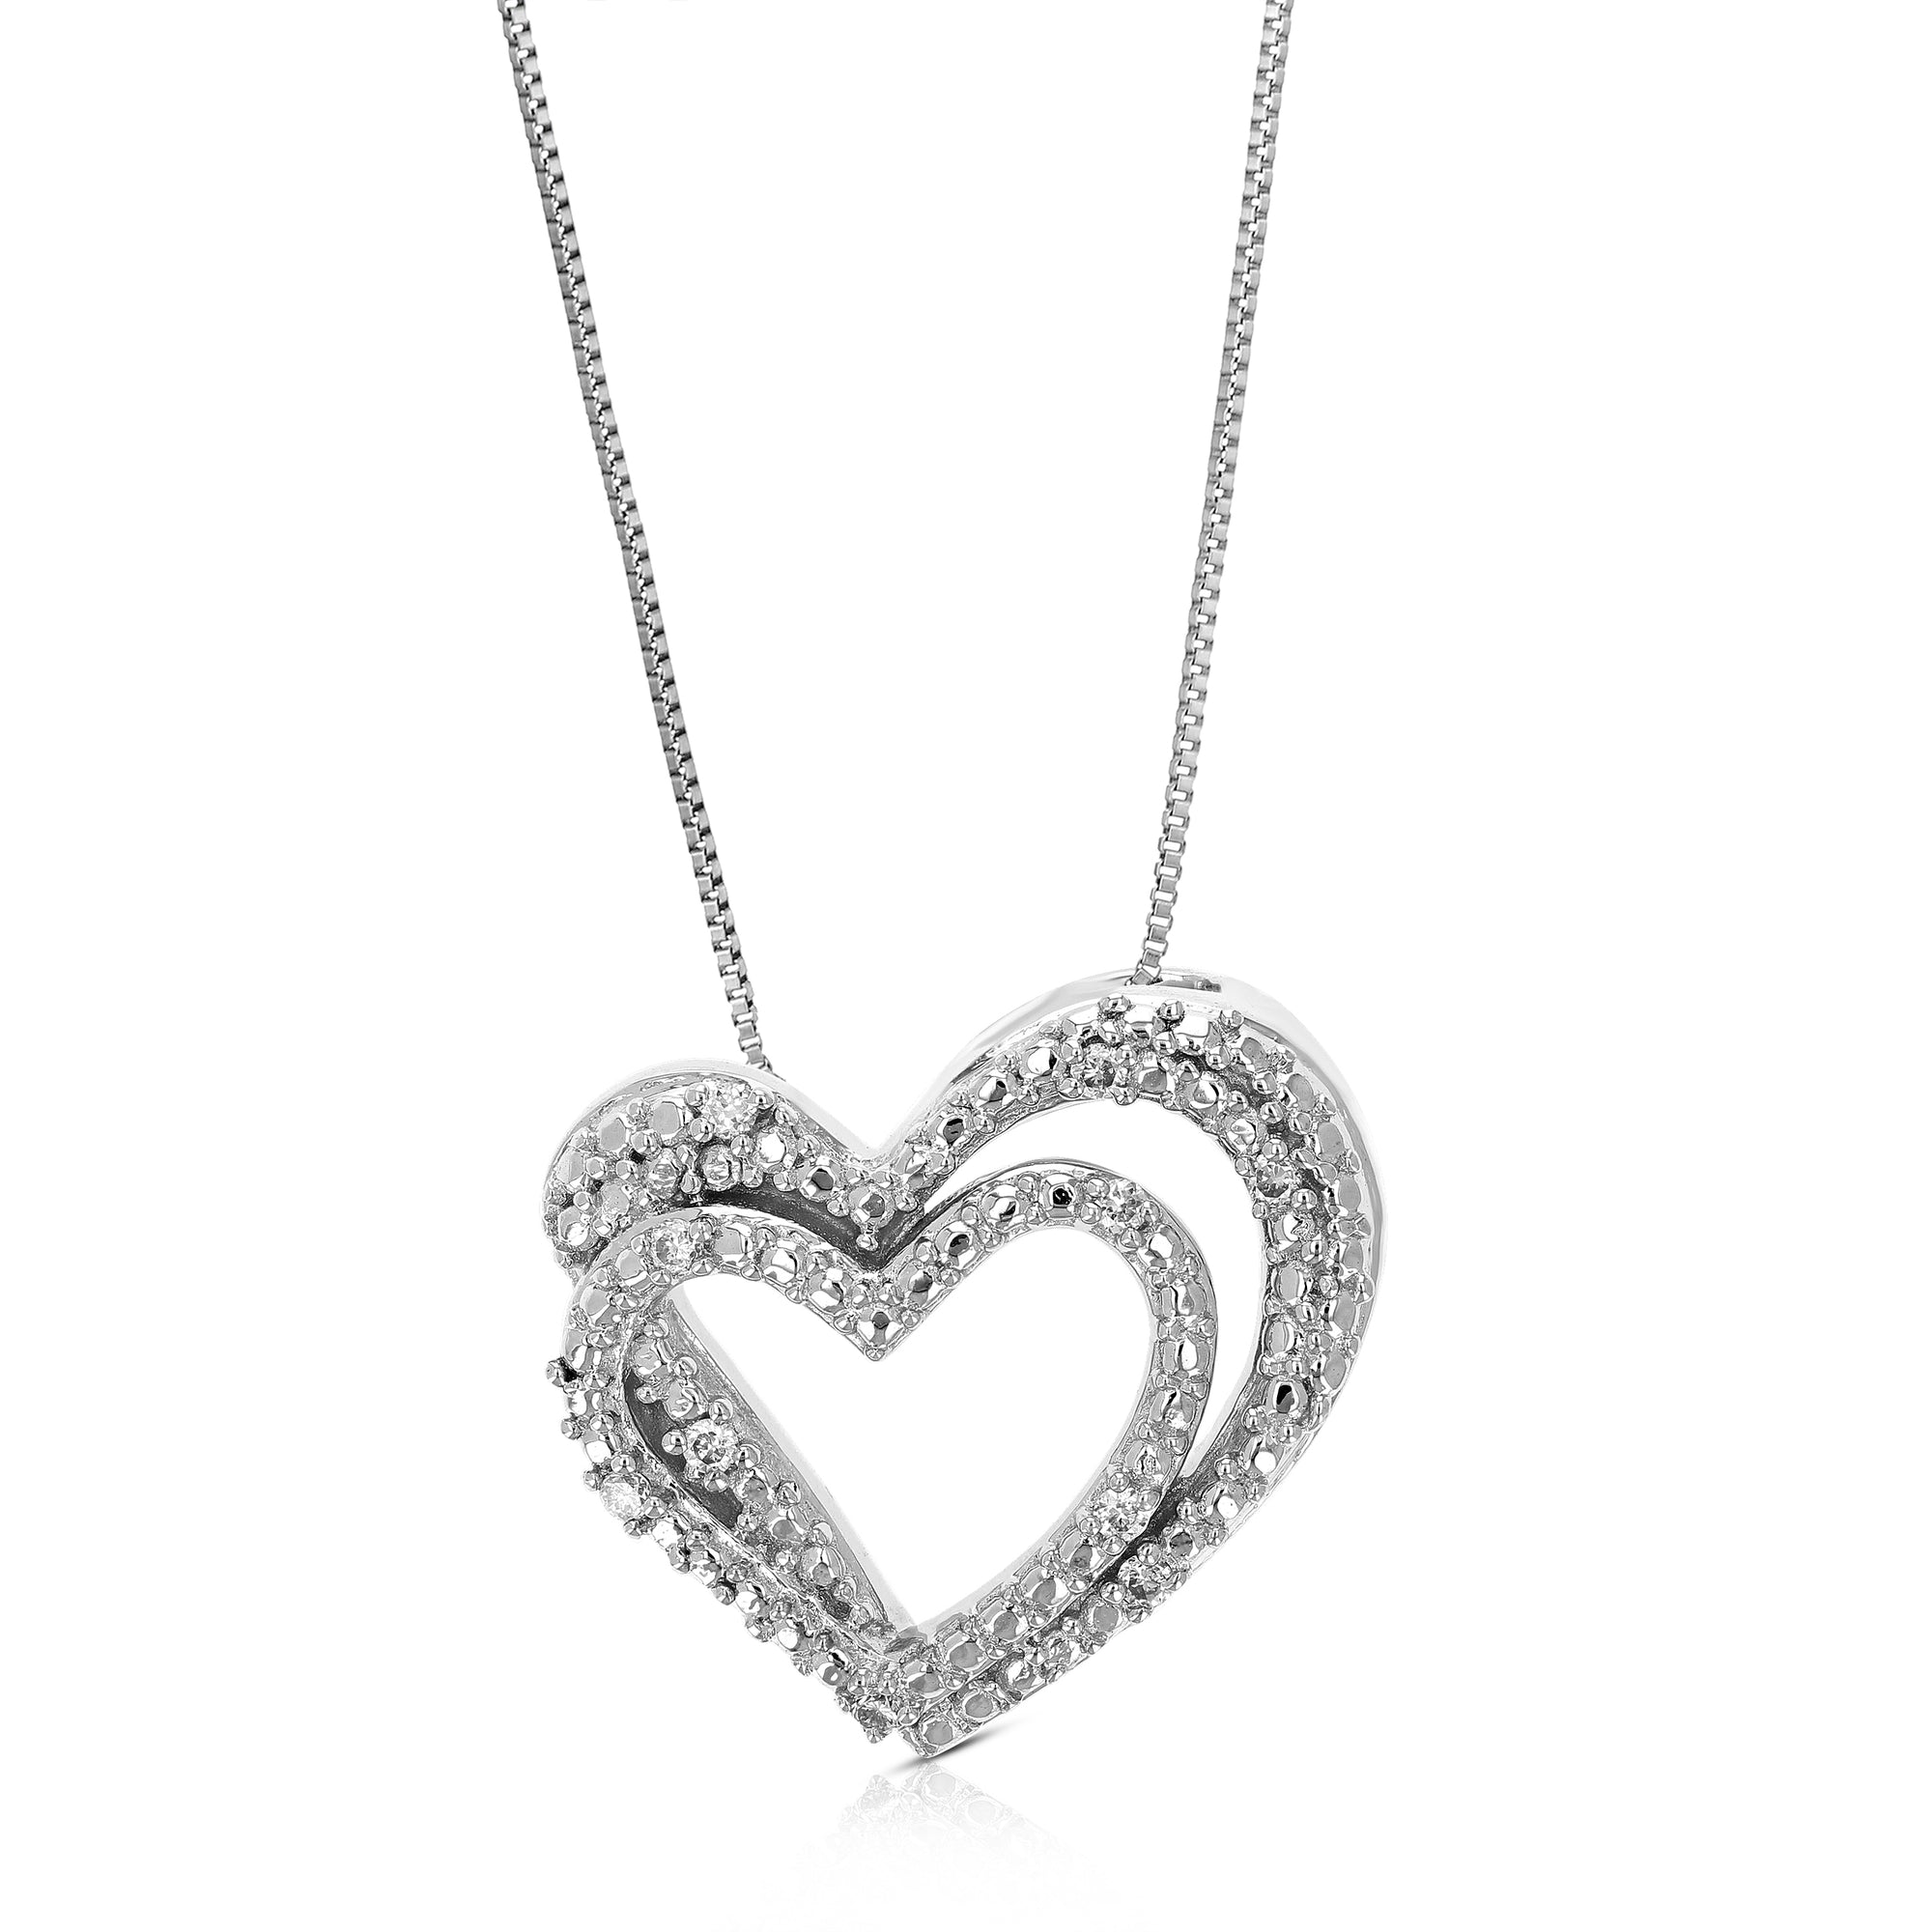 1/14 cttw Lab Grown Diamond Heart Pendant Necklace .925 Sterling Silver 1/2 Inch with 18 Inch Chain, Size 1/2 Inch